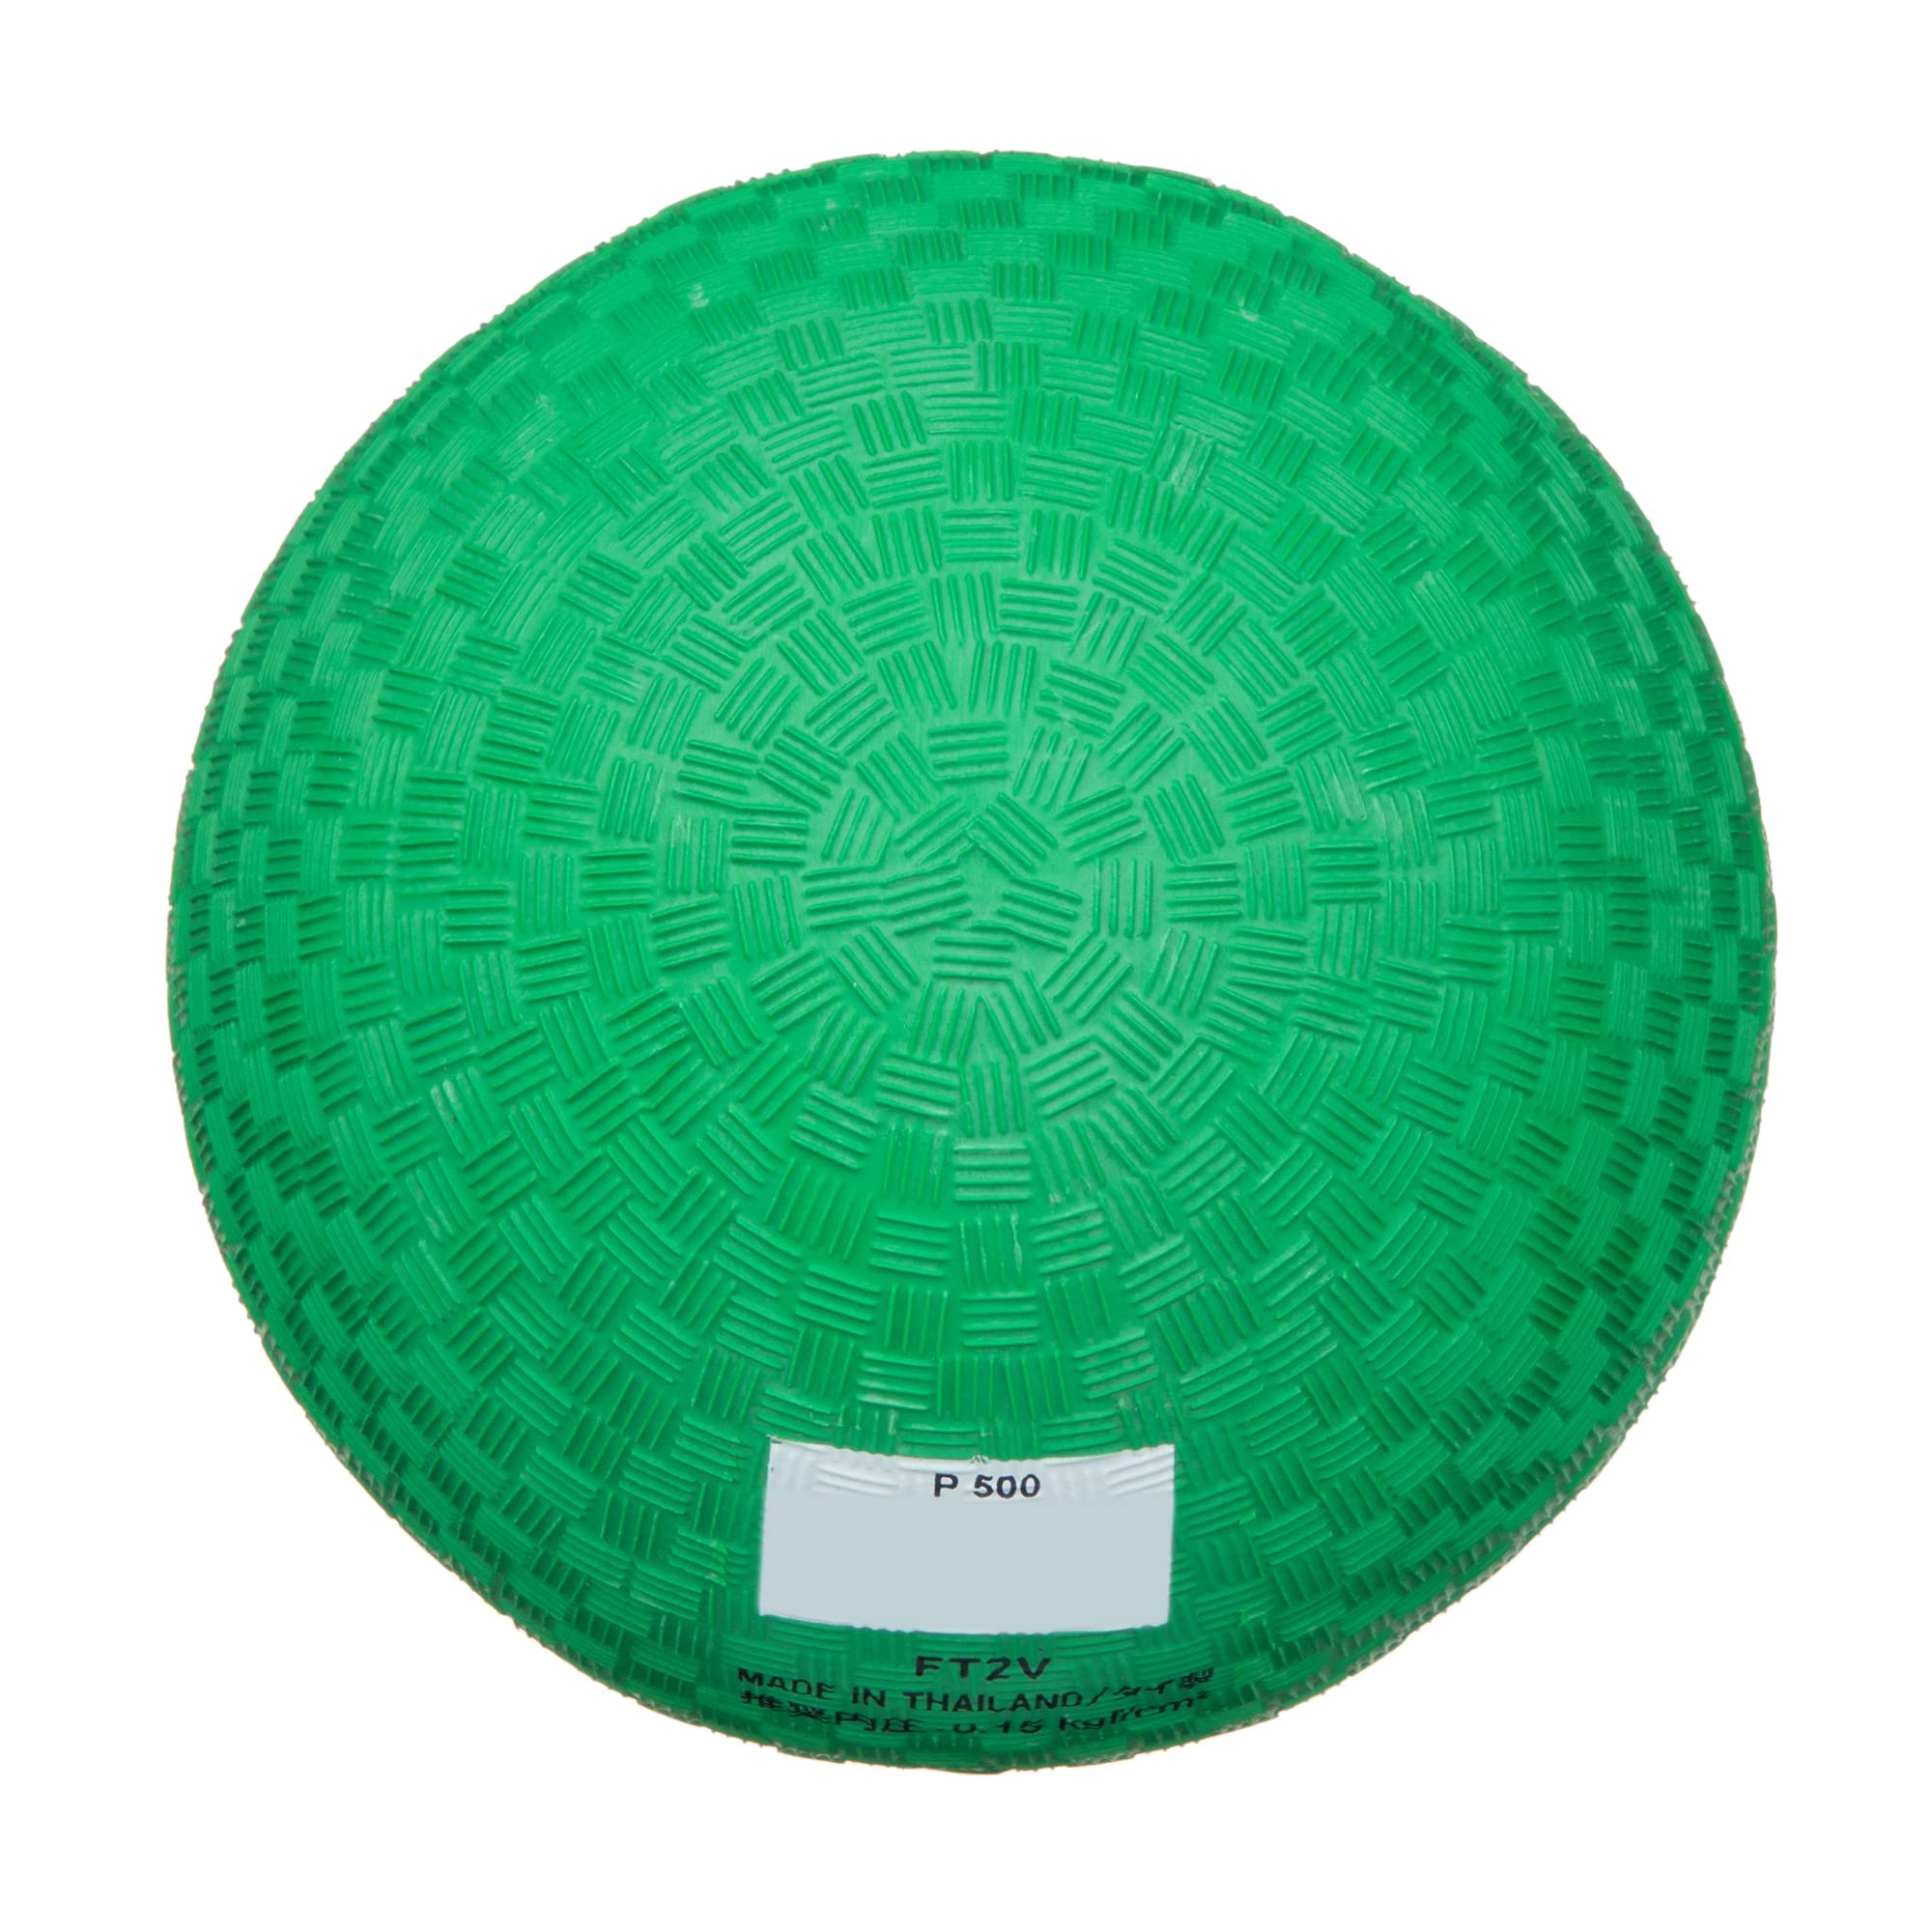 mikasa(MIKASA) Play ground ball child oriented diameter approximately 13cm 150~180g green P500 recommendation inside pressure 0.15(kgf/?) green 